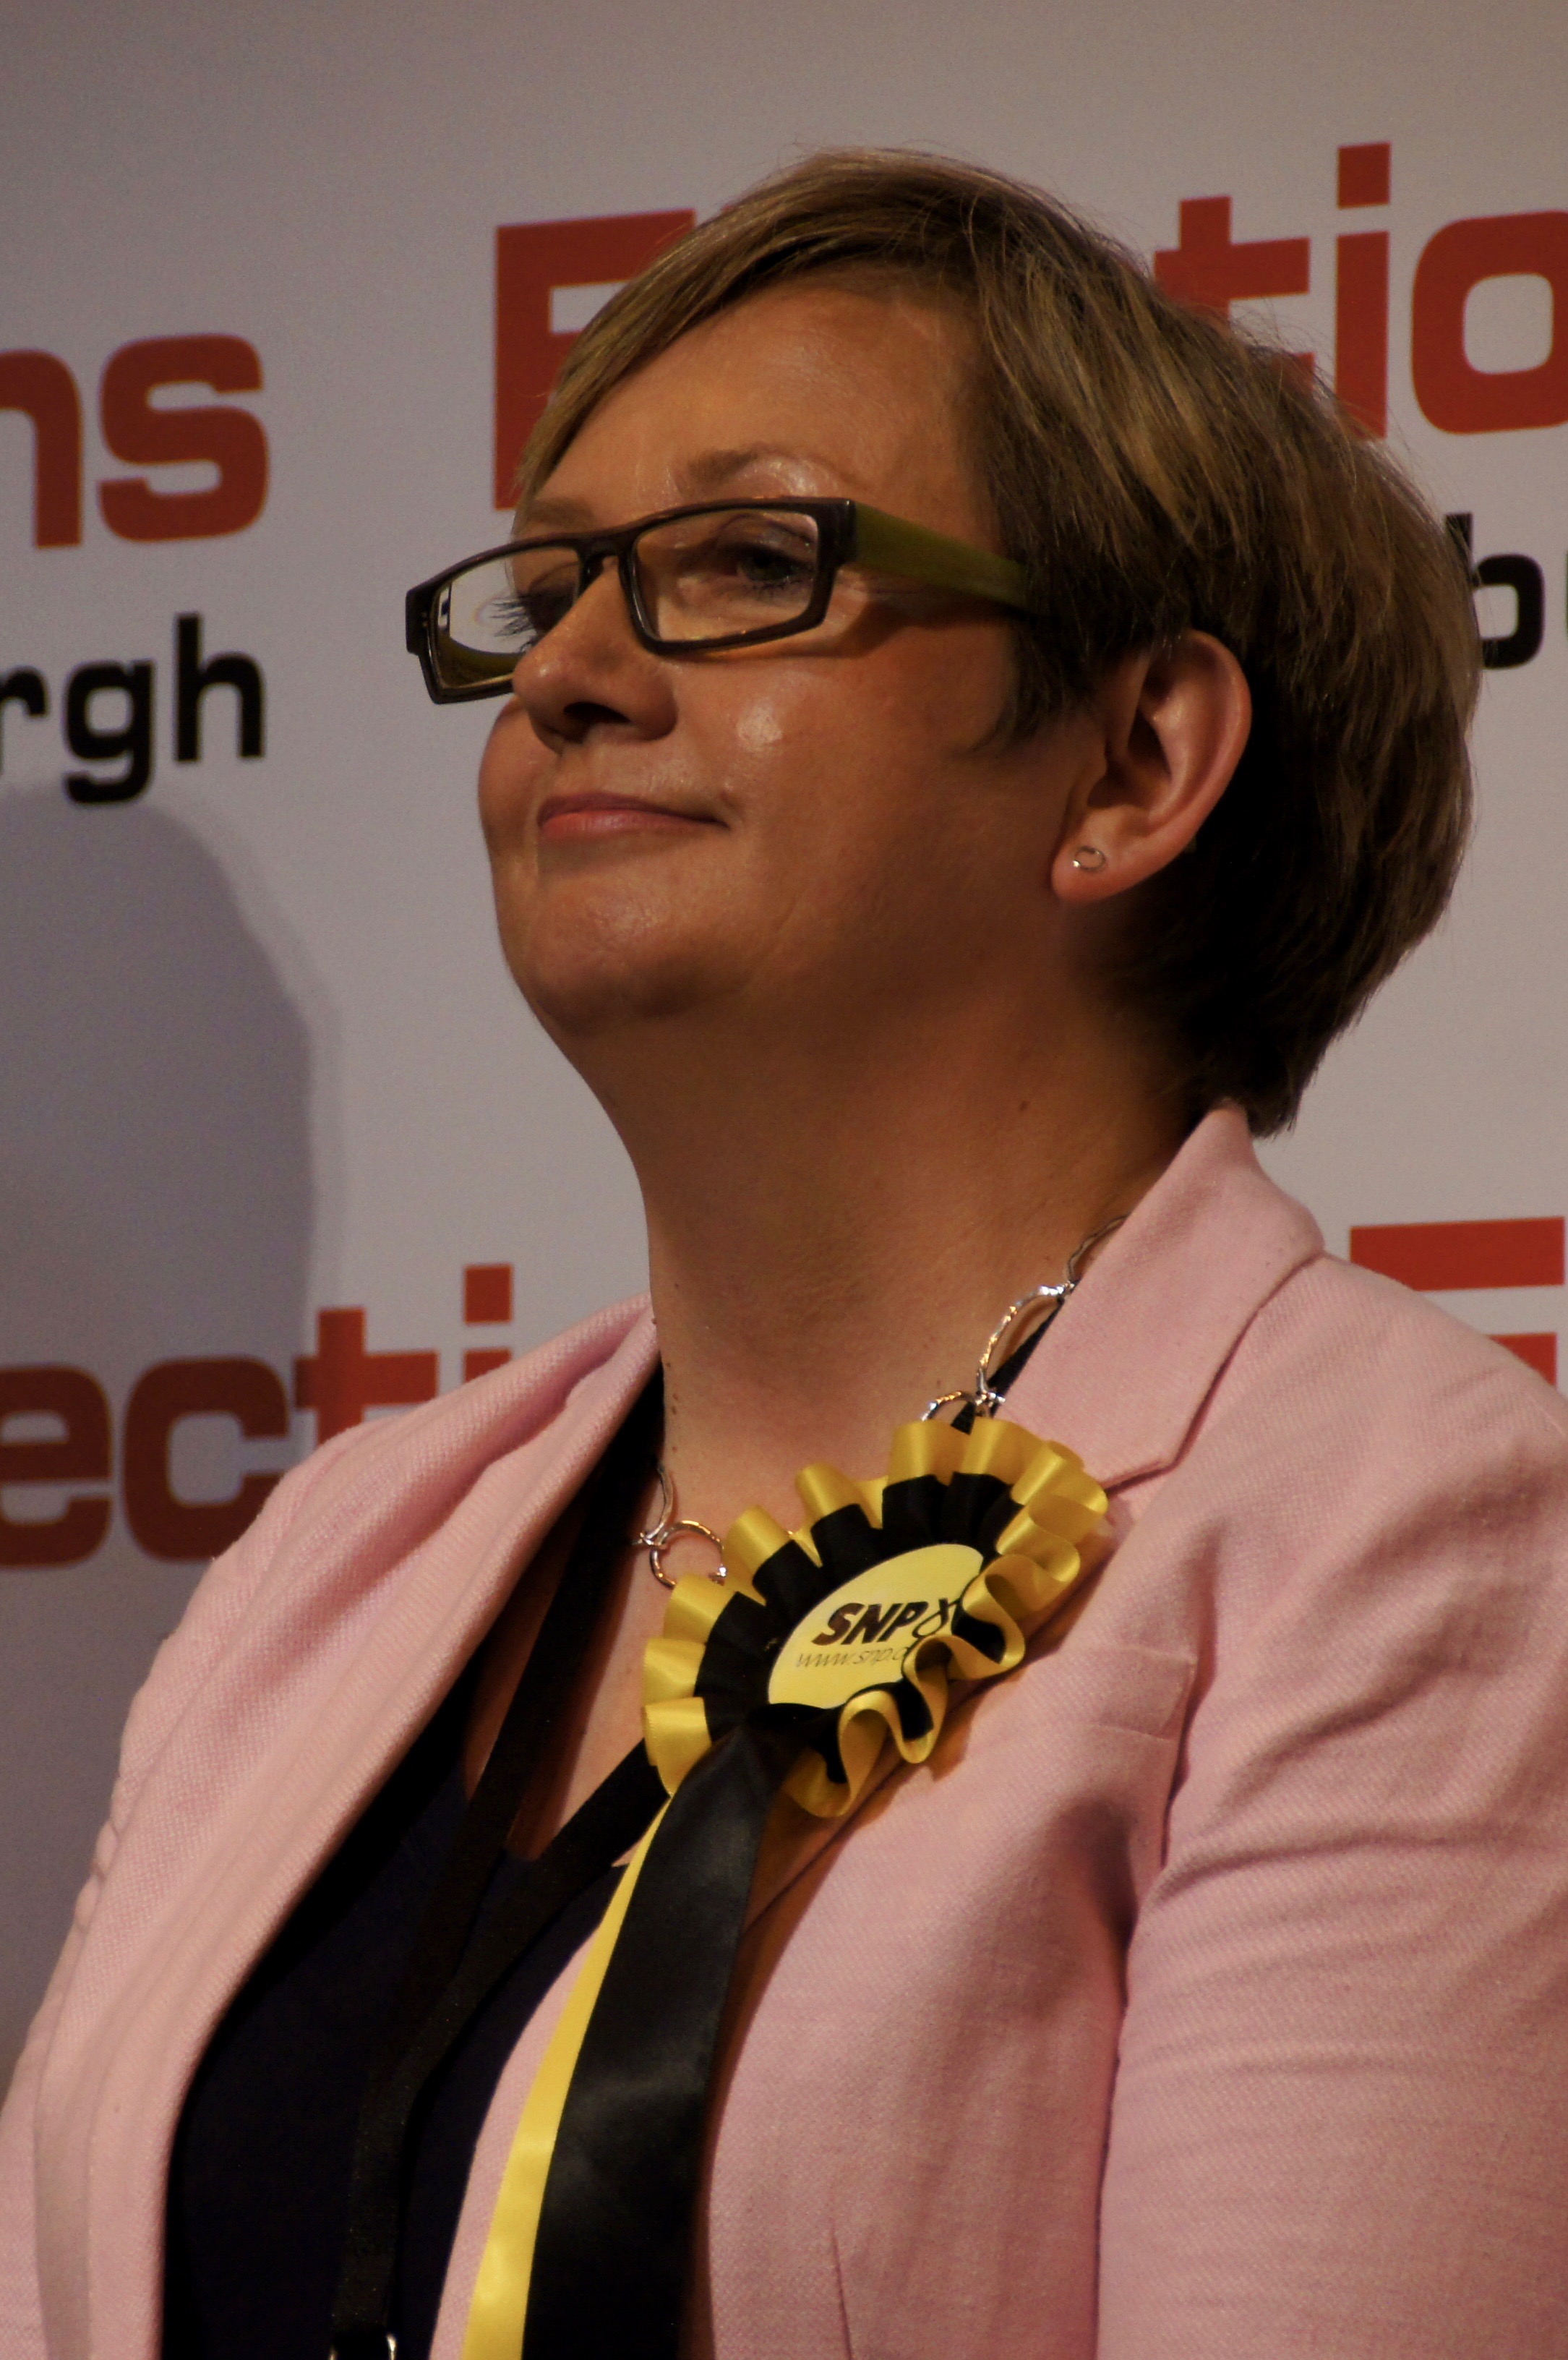 Joanna Cherry QC MP was elected for the second time at the General Election 2017